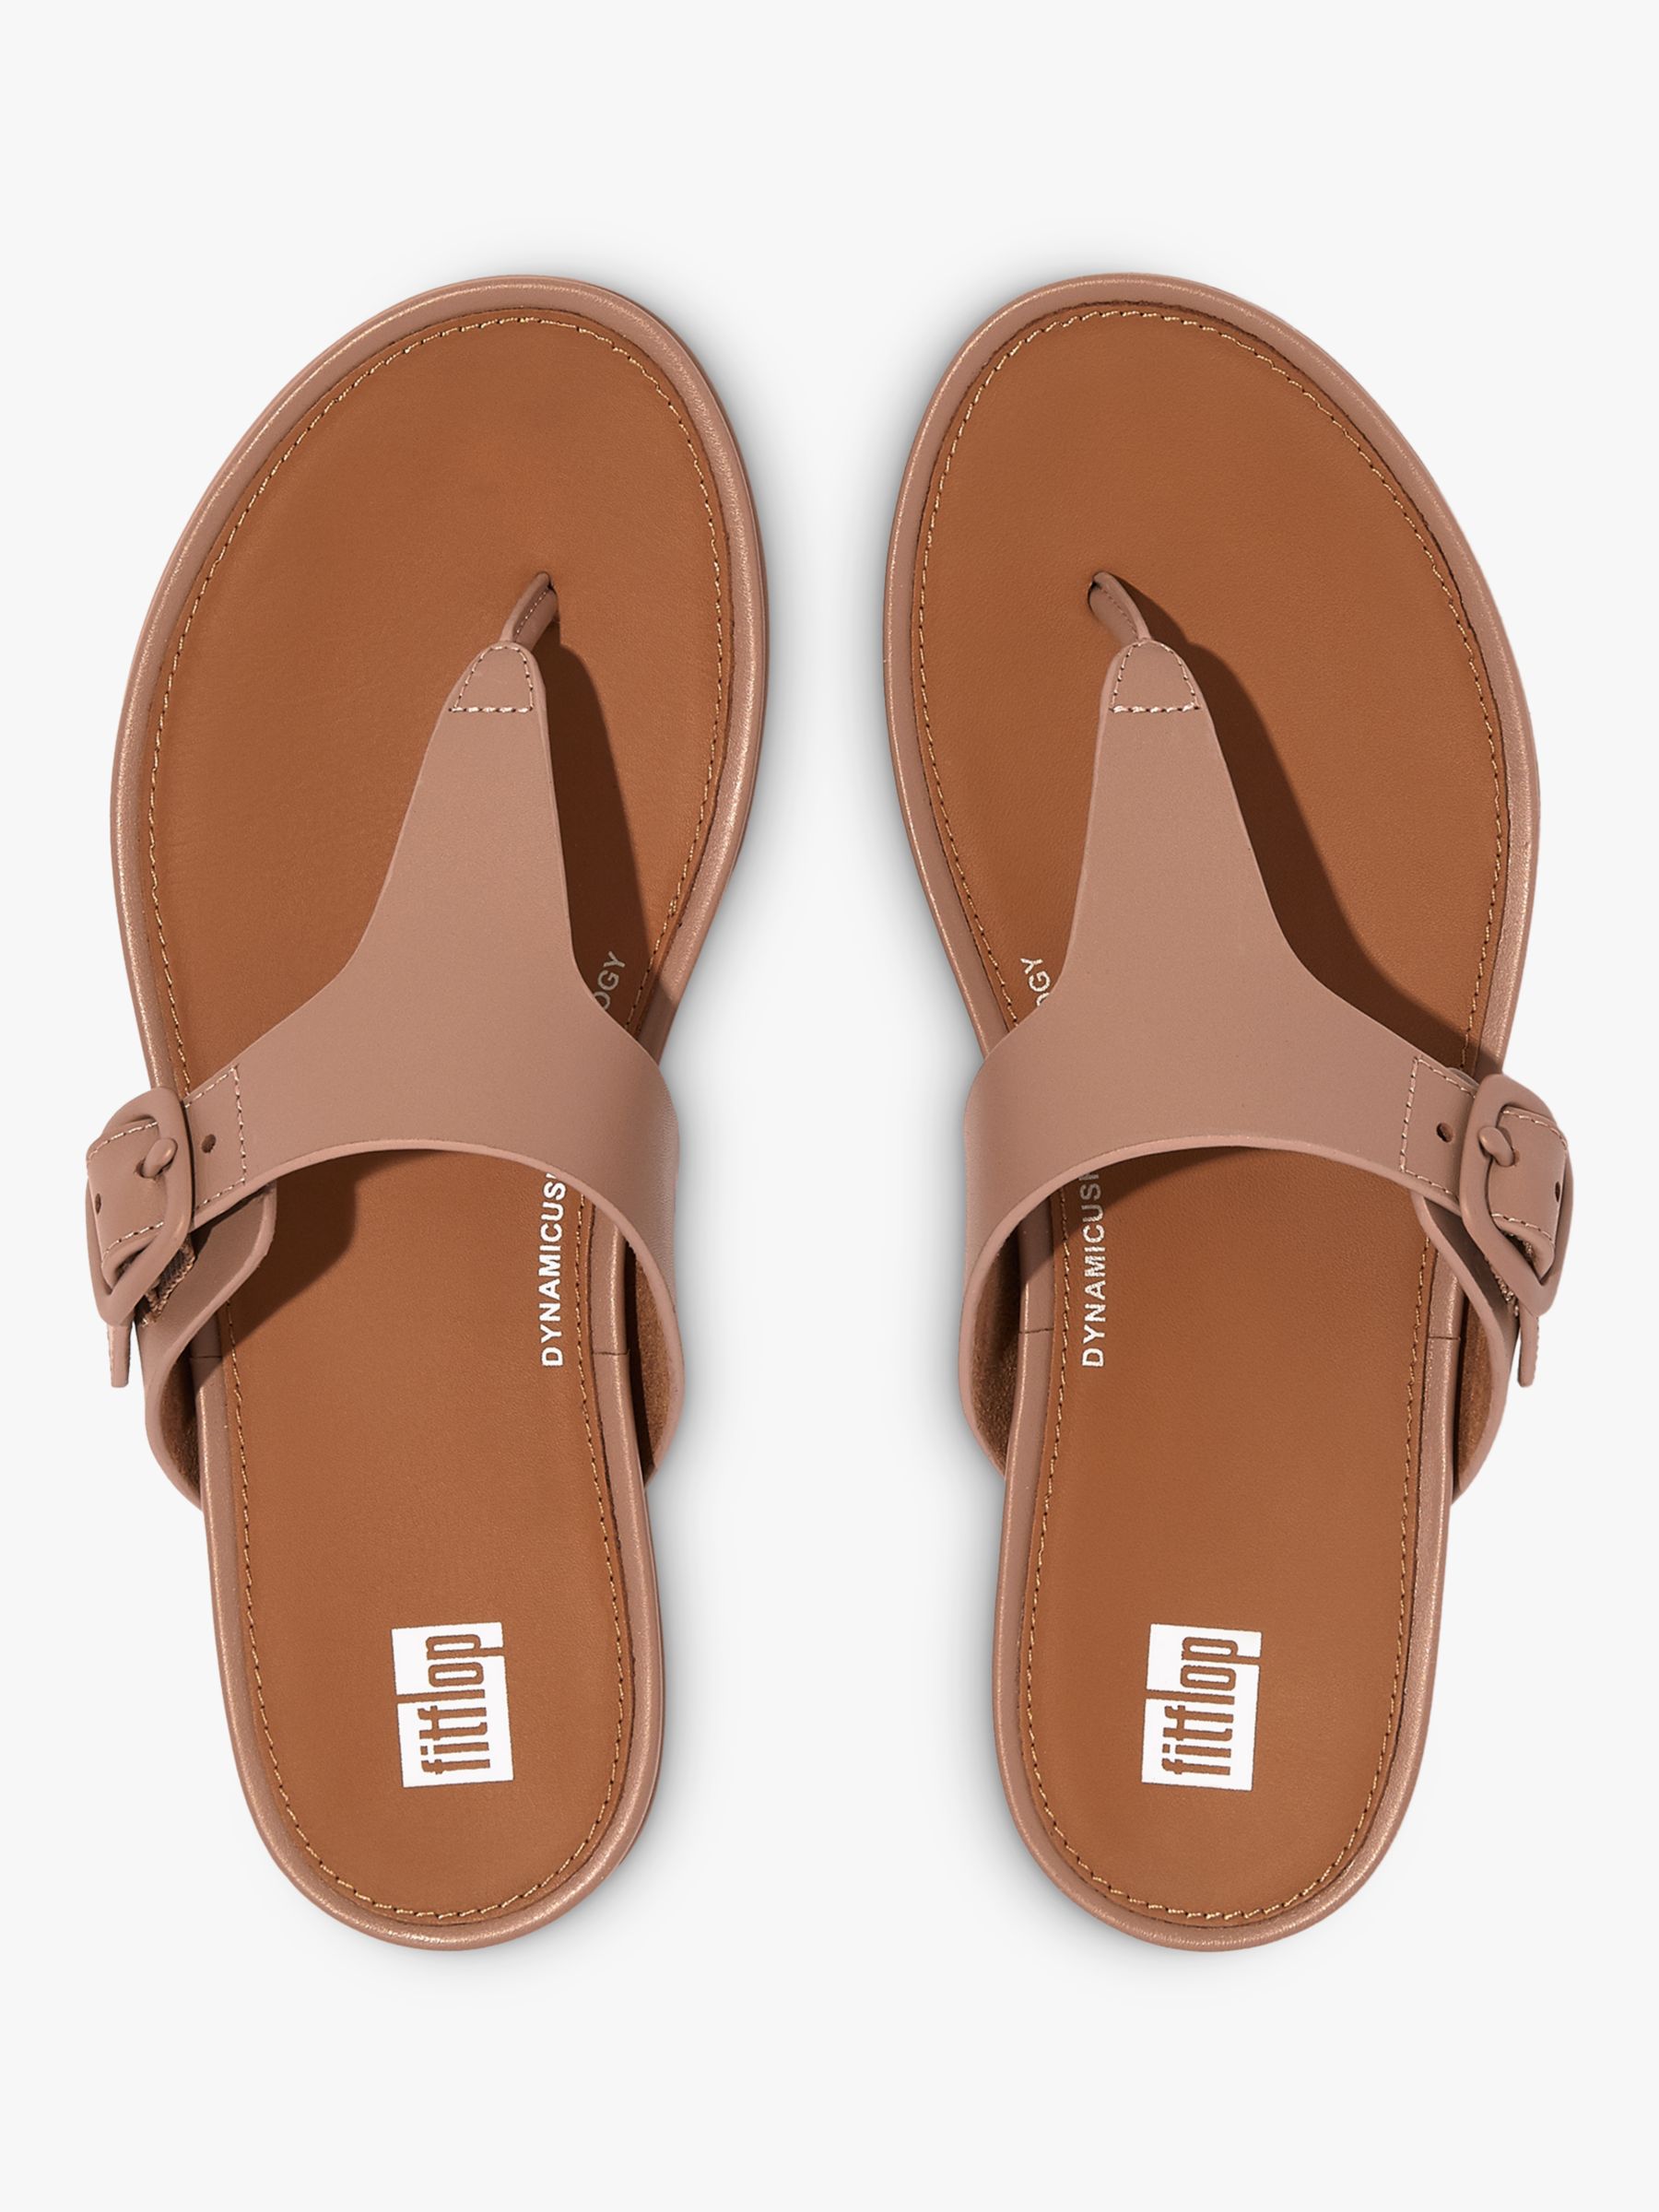 FitFlop Gracie Leather Toe Post Sandals, Beige at John Lewis